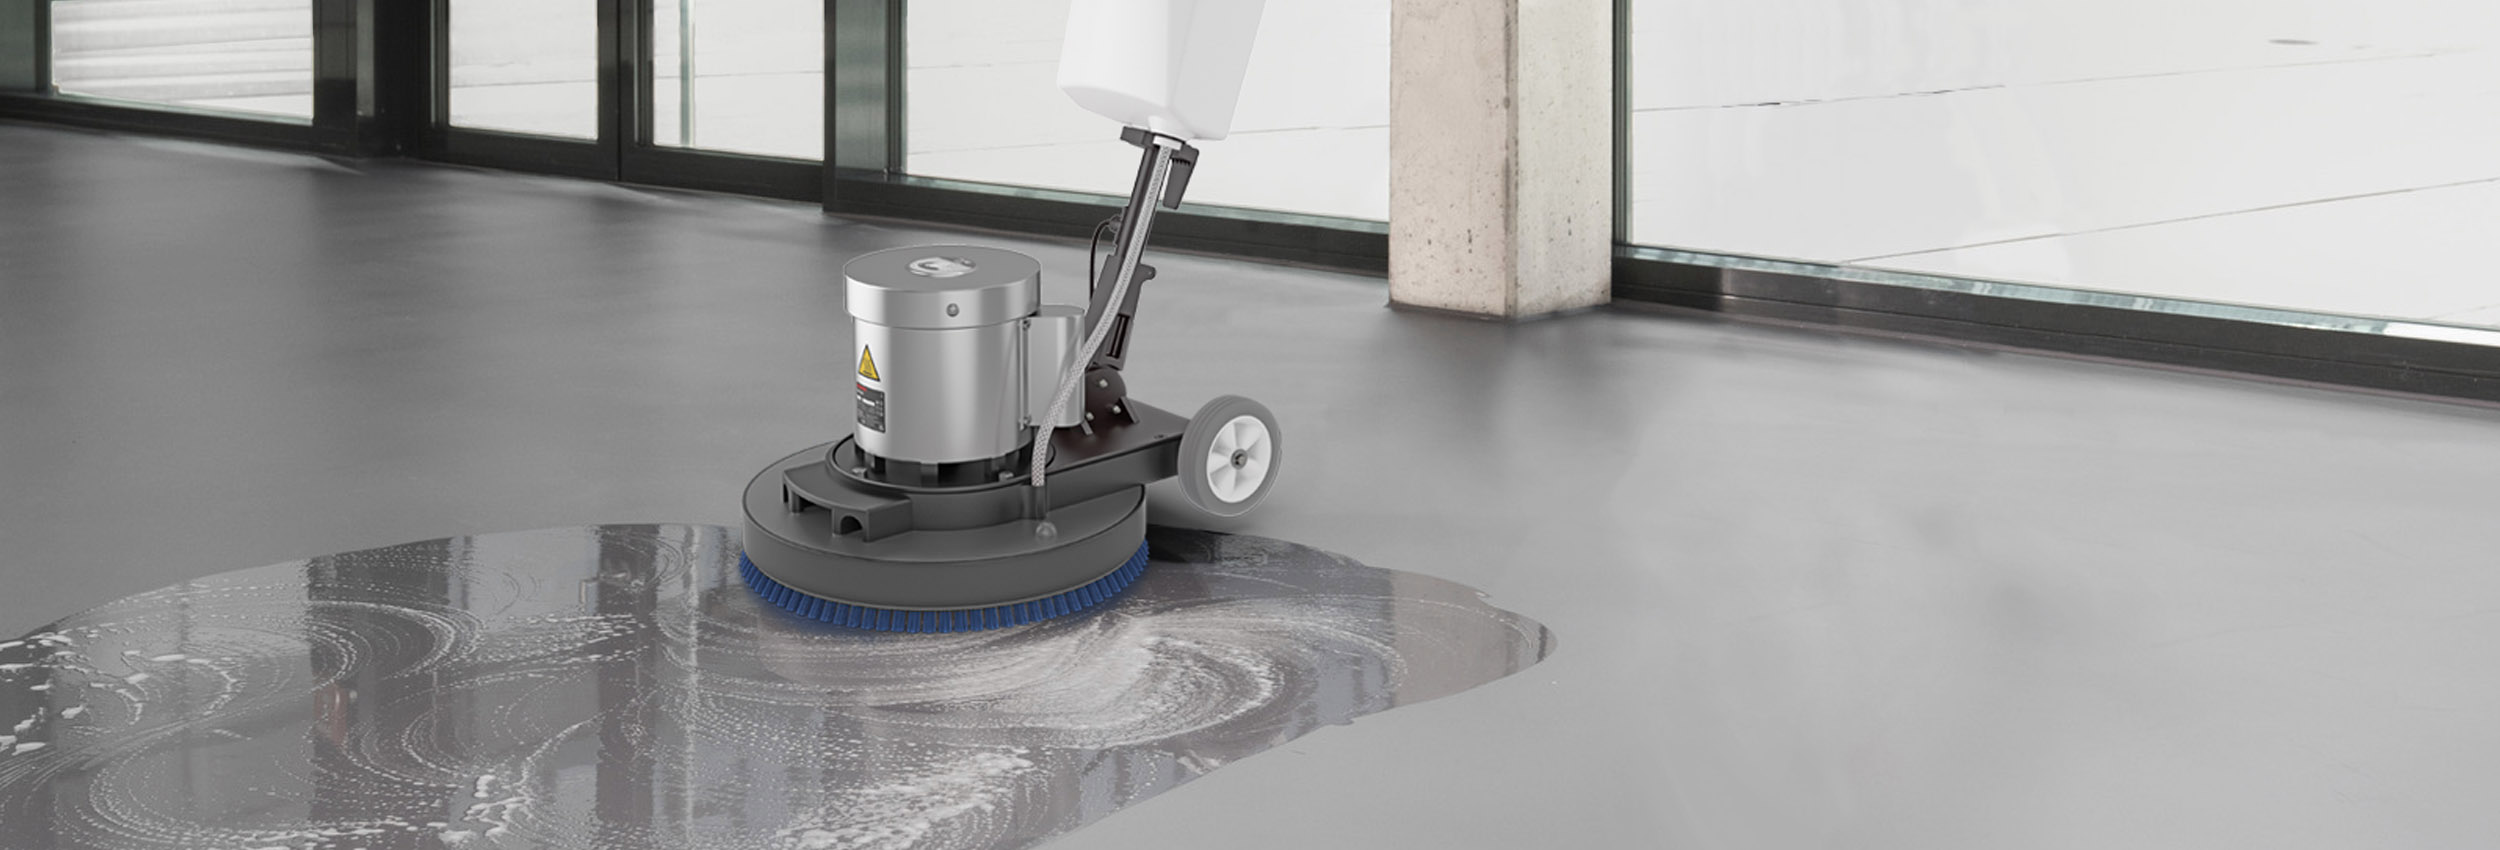 Best proven for floor cleaning